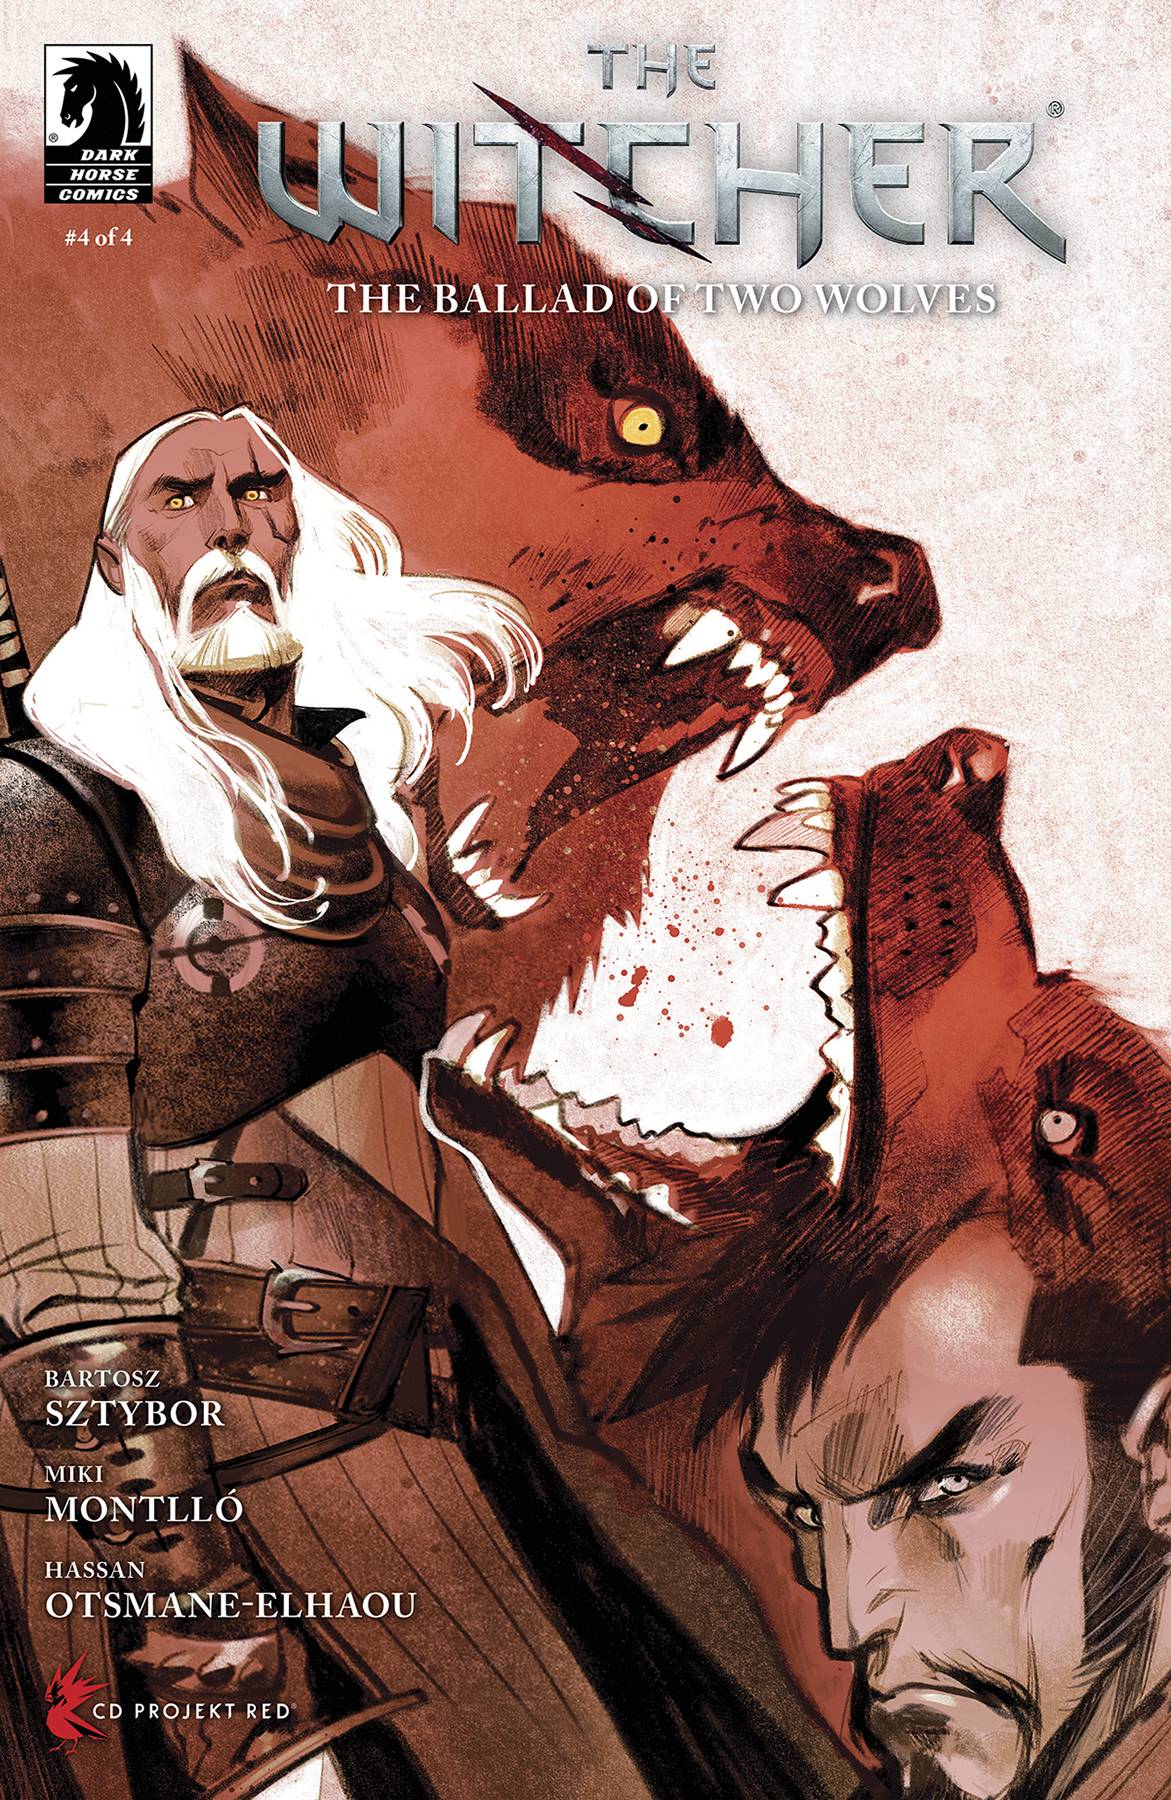 WITCHER THE BALLAD OF TWO WOLVES #4 (OF 4) CVR A MONTLLO